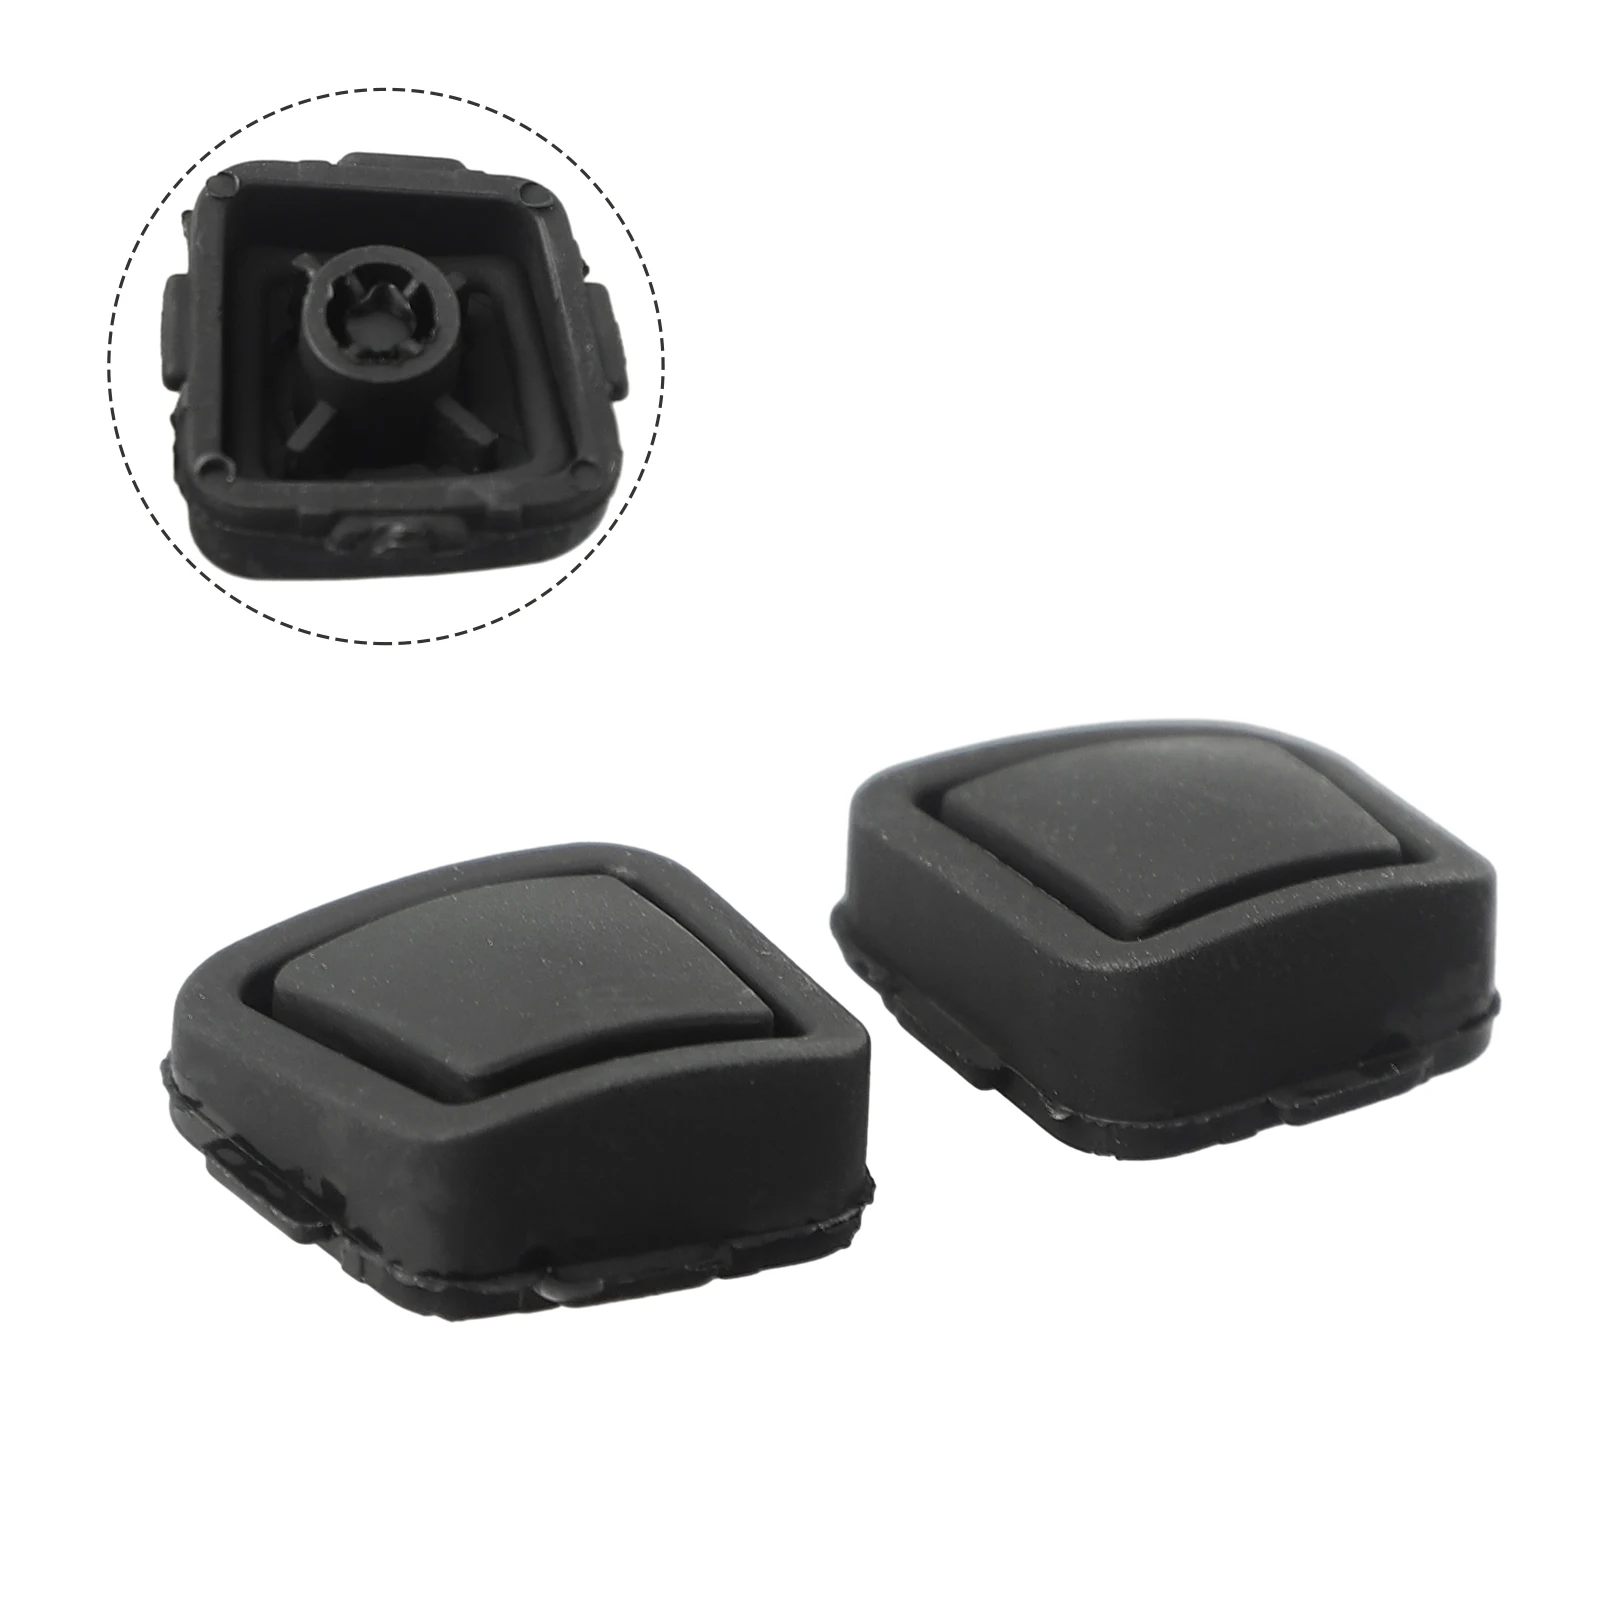 For Mercedes Keyless Entry Outside Door Handle Sensor Button Rubber Cover For Mercedes-Benz W211 C209 W219 W251